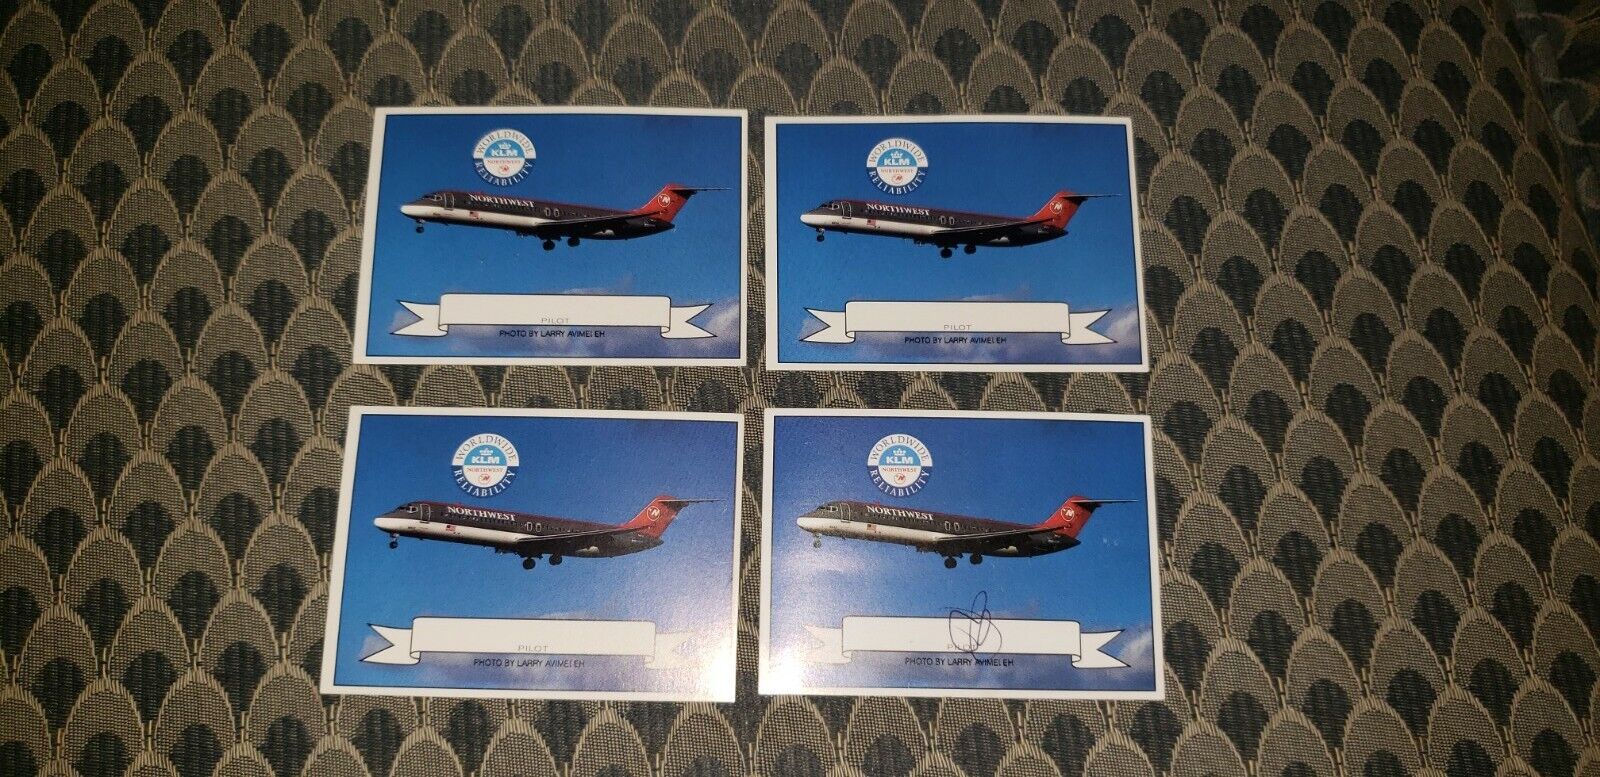 4 NORTHWEST AIRLINES MCDONNELL-DOUGLAS DC-9-30 PILOT CARD COLLECTOR CARD 6/92 